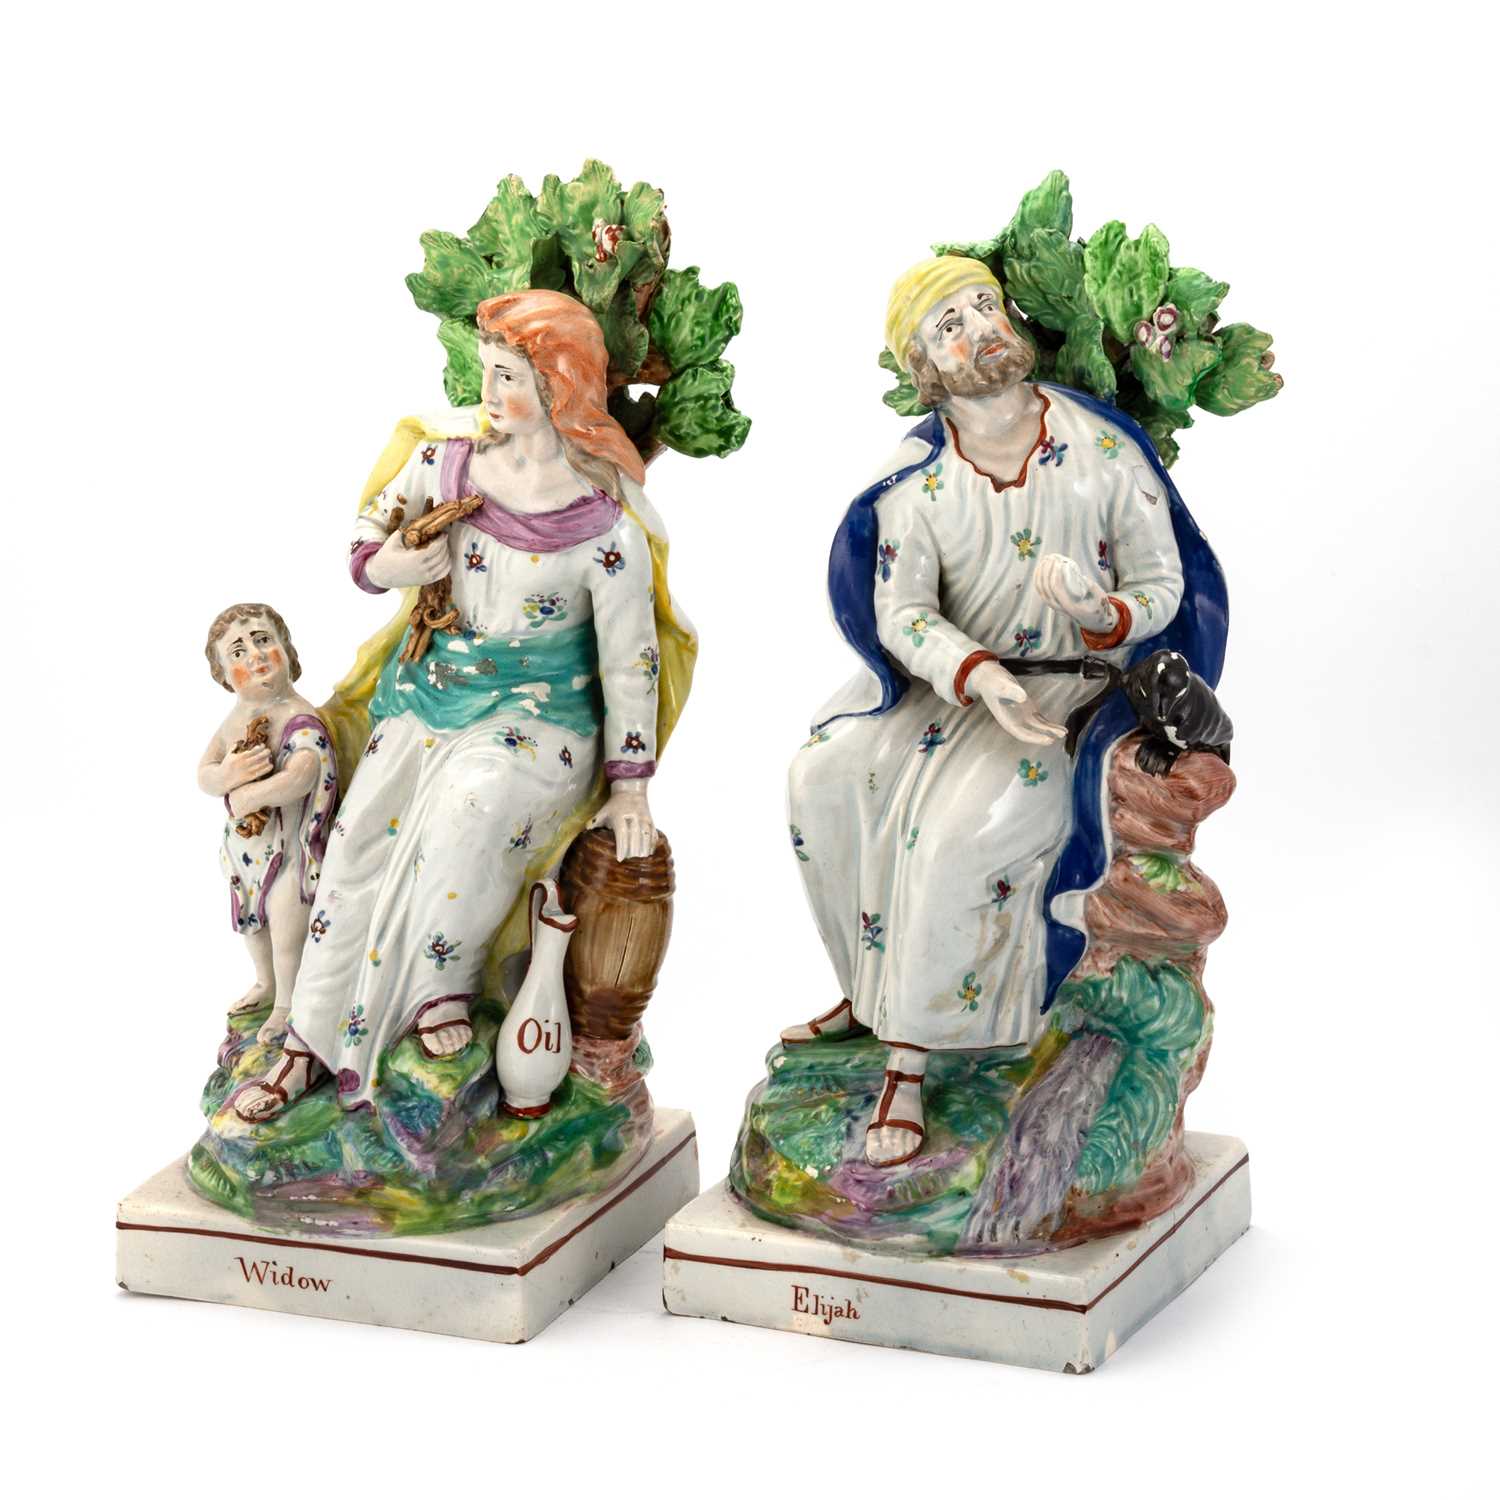 A PAIR OF ENOCH WOOD PEARLWARE FIGURES, CIRCA 1810-30